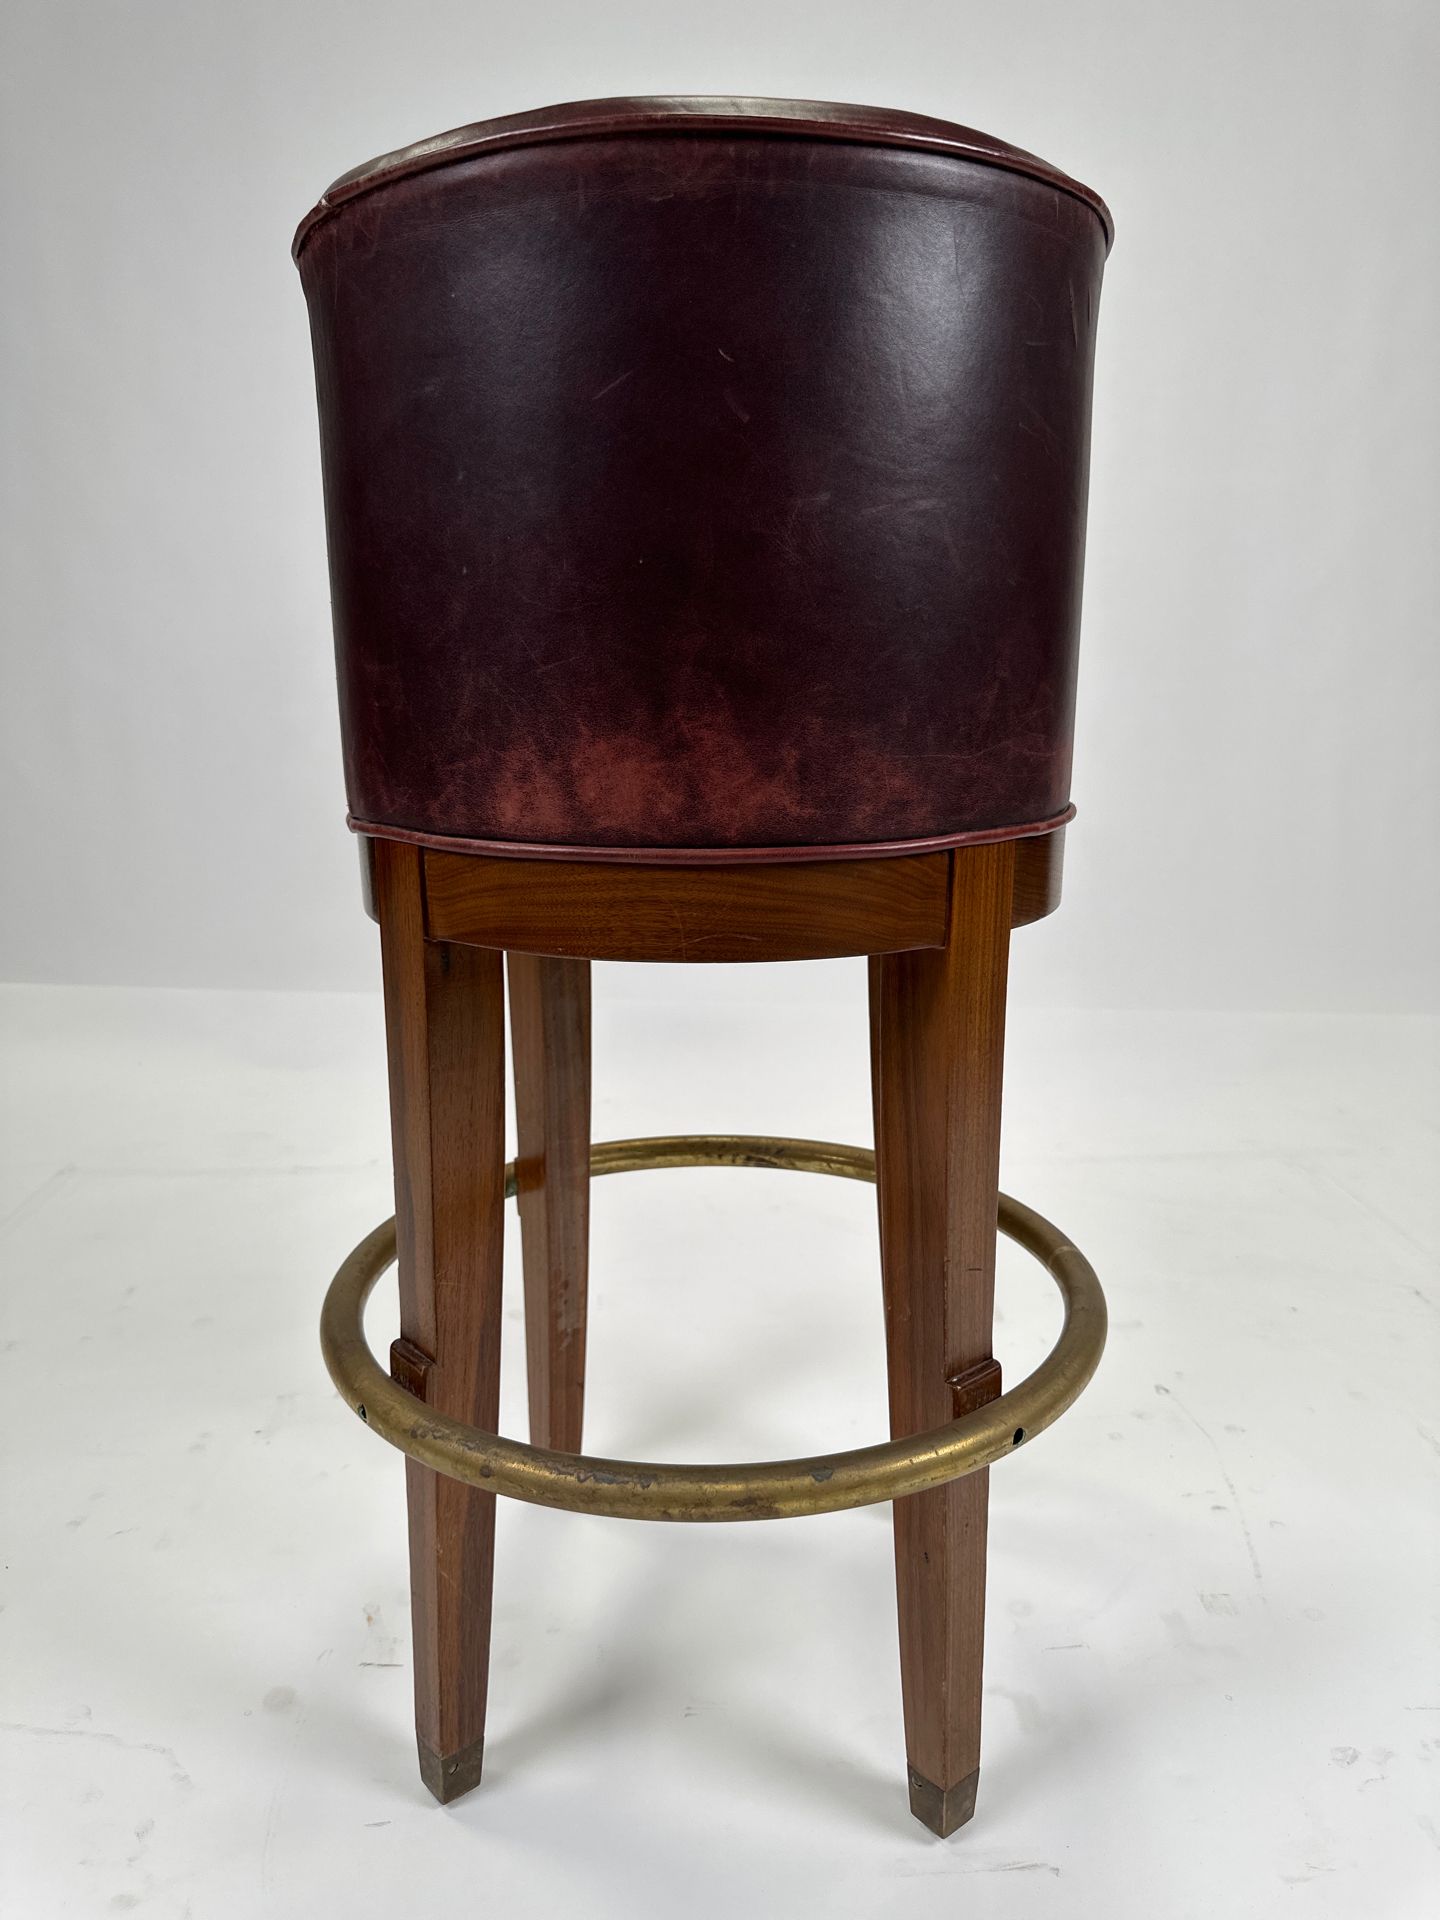 Leather & Brass Bar Stool - Image 4 of 6